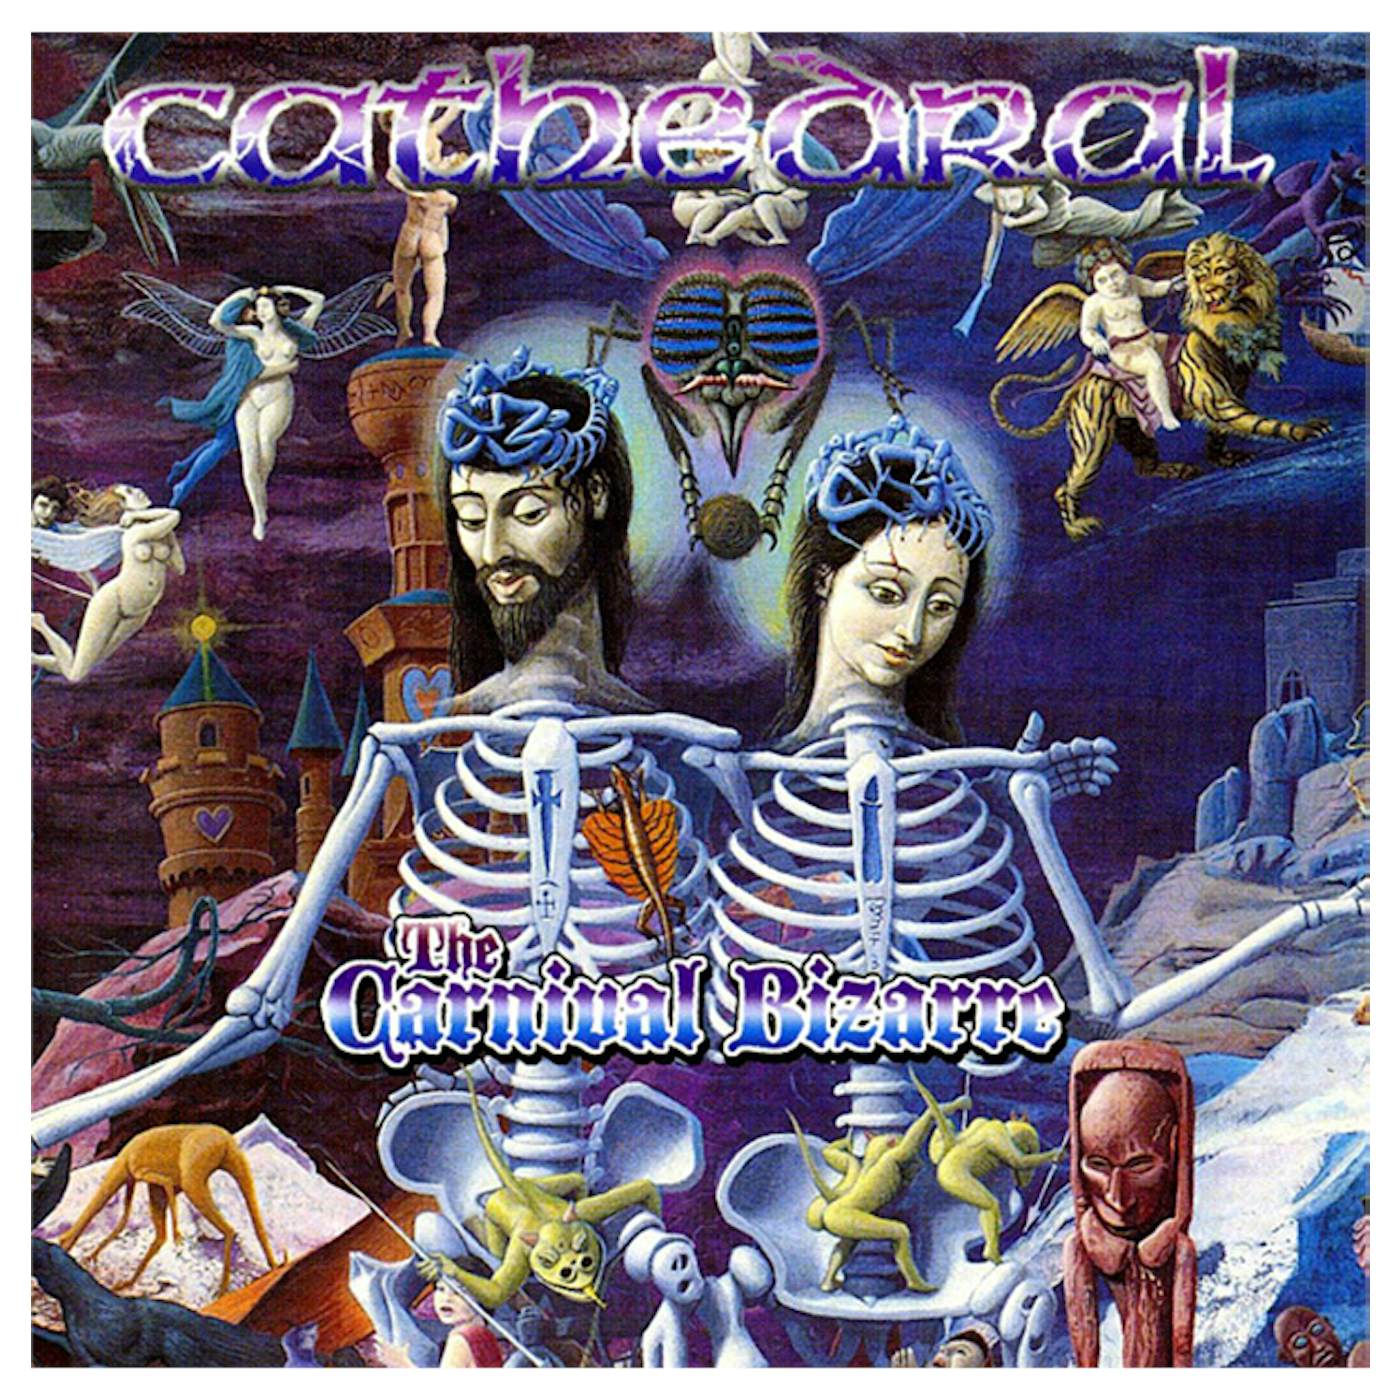 CATHEDRAL - 'The Carnival Bizarre' CD